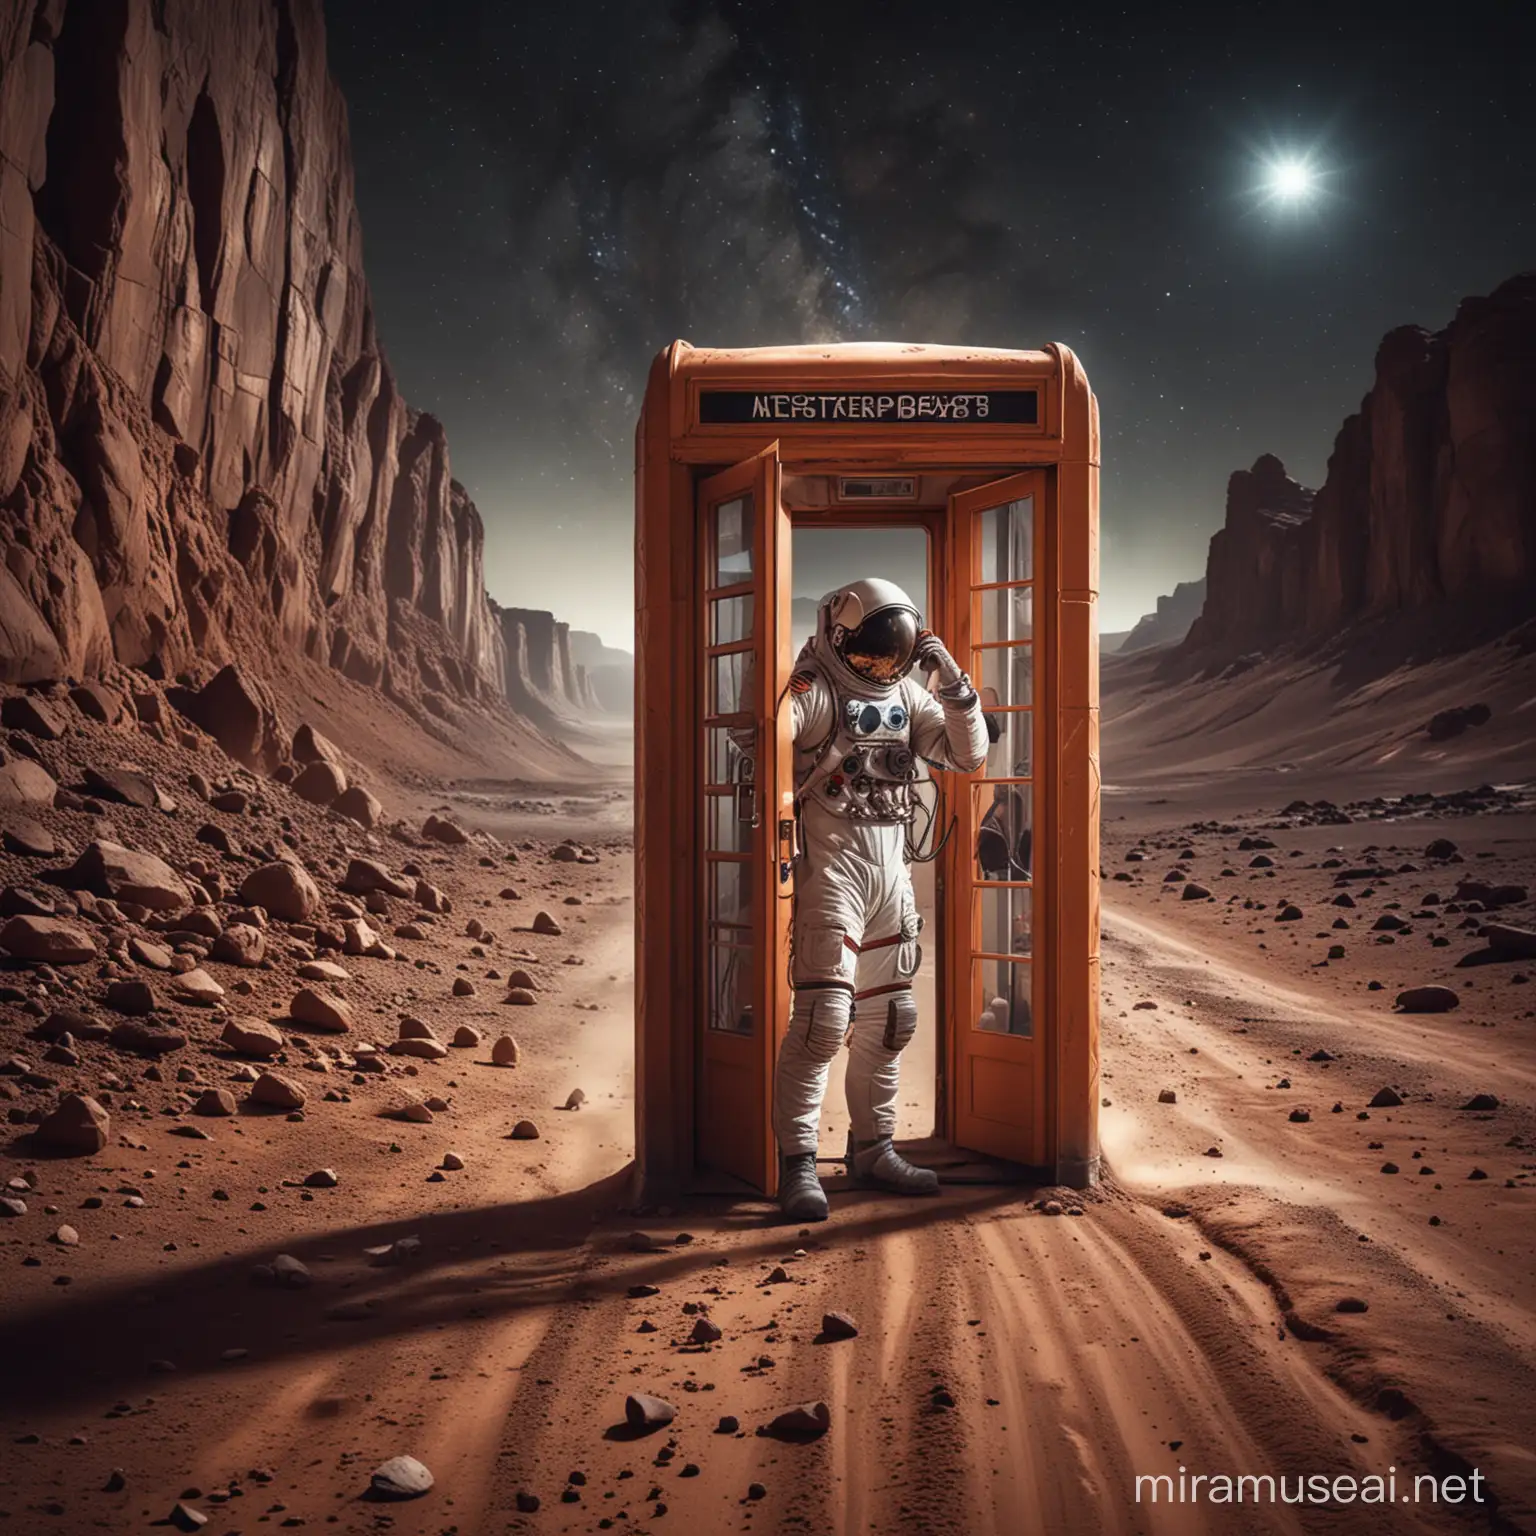 Lonely Astronaut Making a Call from Mars Phone Booth at Night